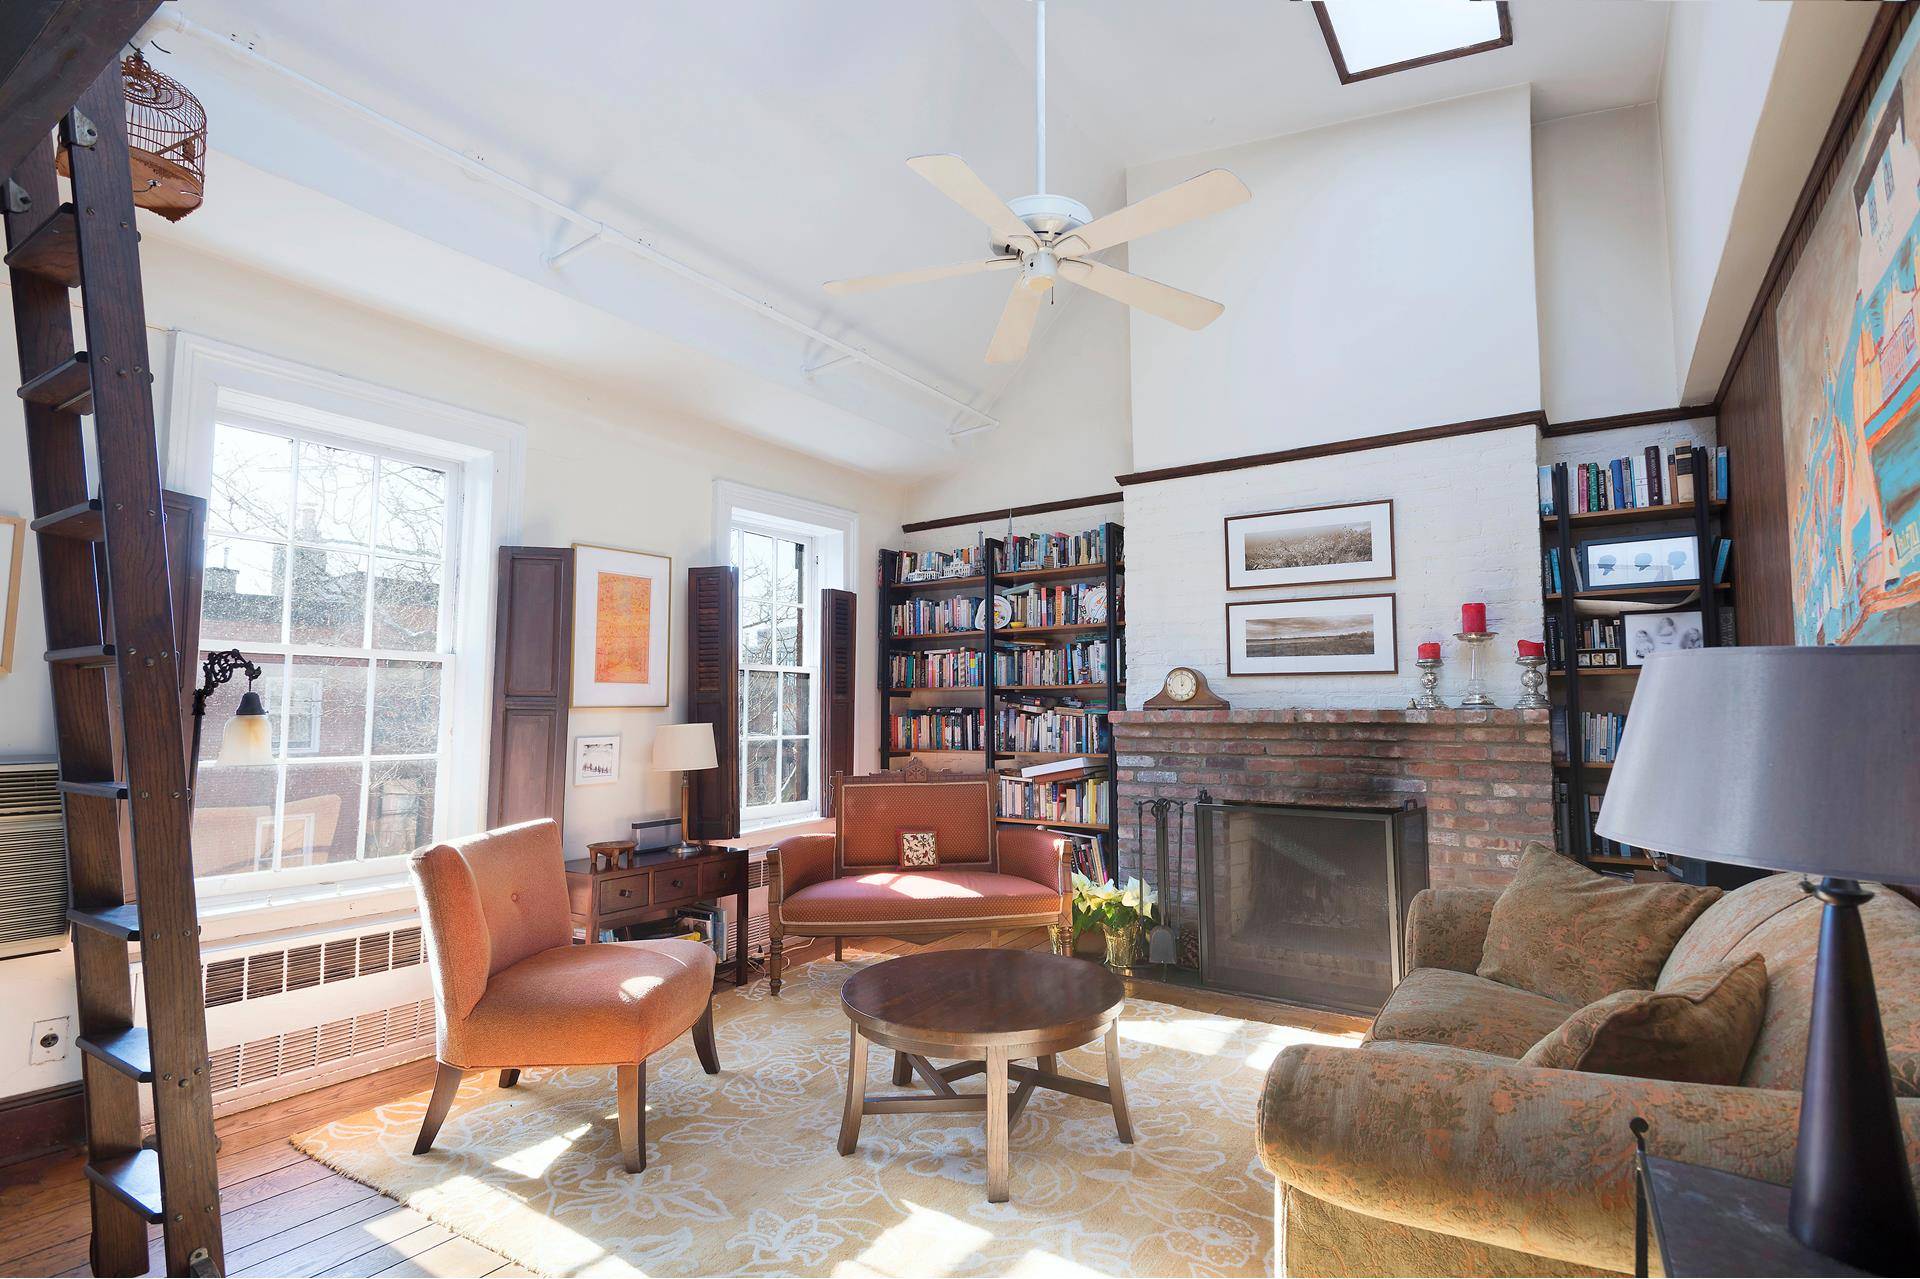 Please call email for private showing and OPEN HOUSE AppointmentFeatured in BROWNSTONER !